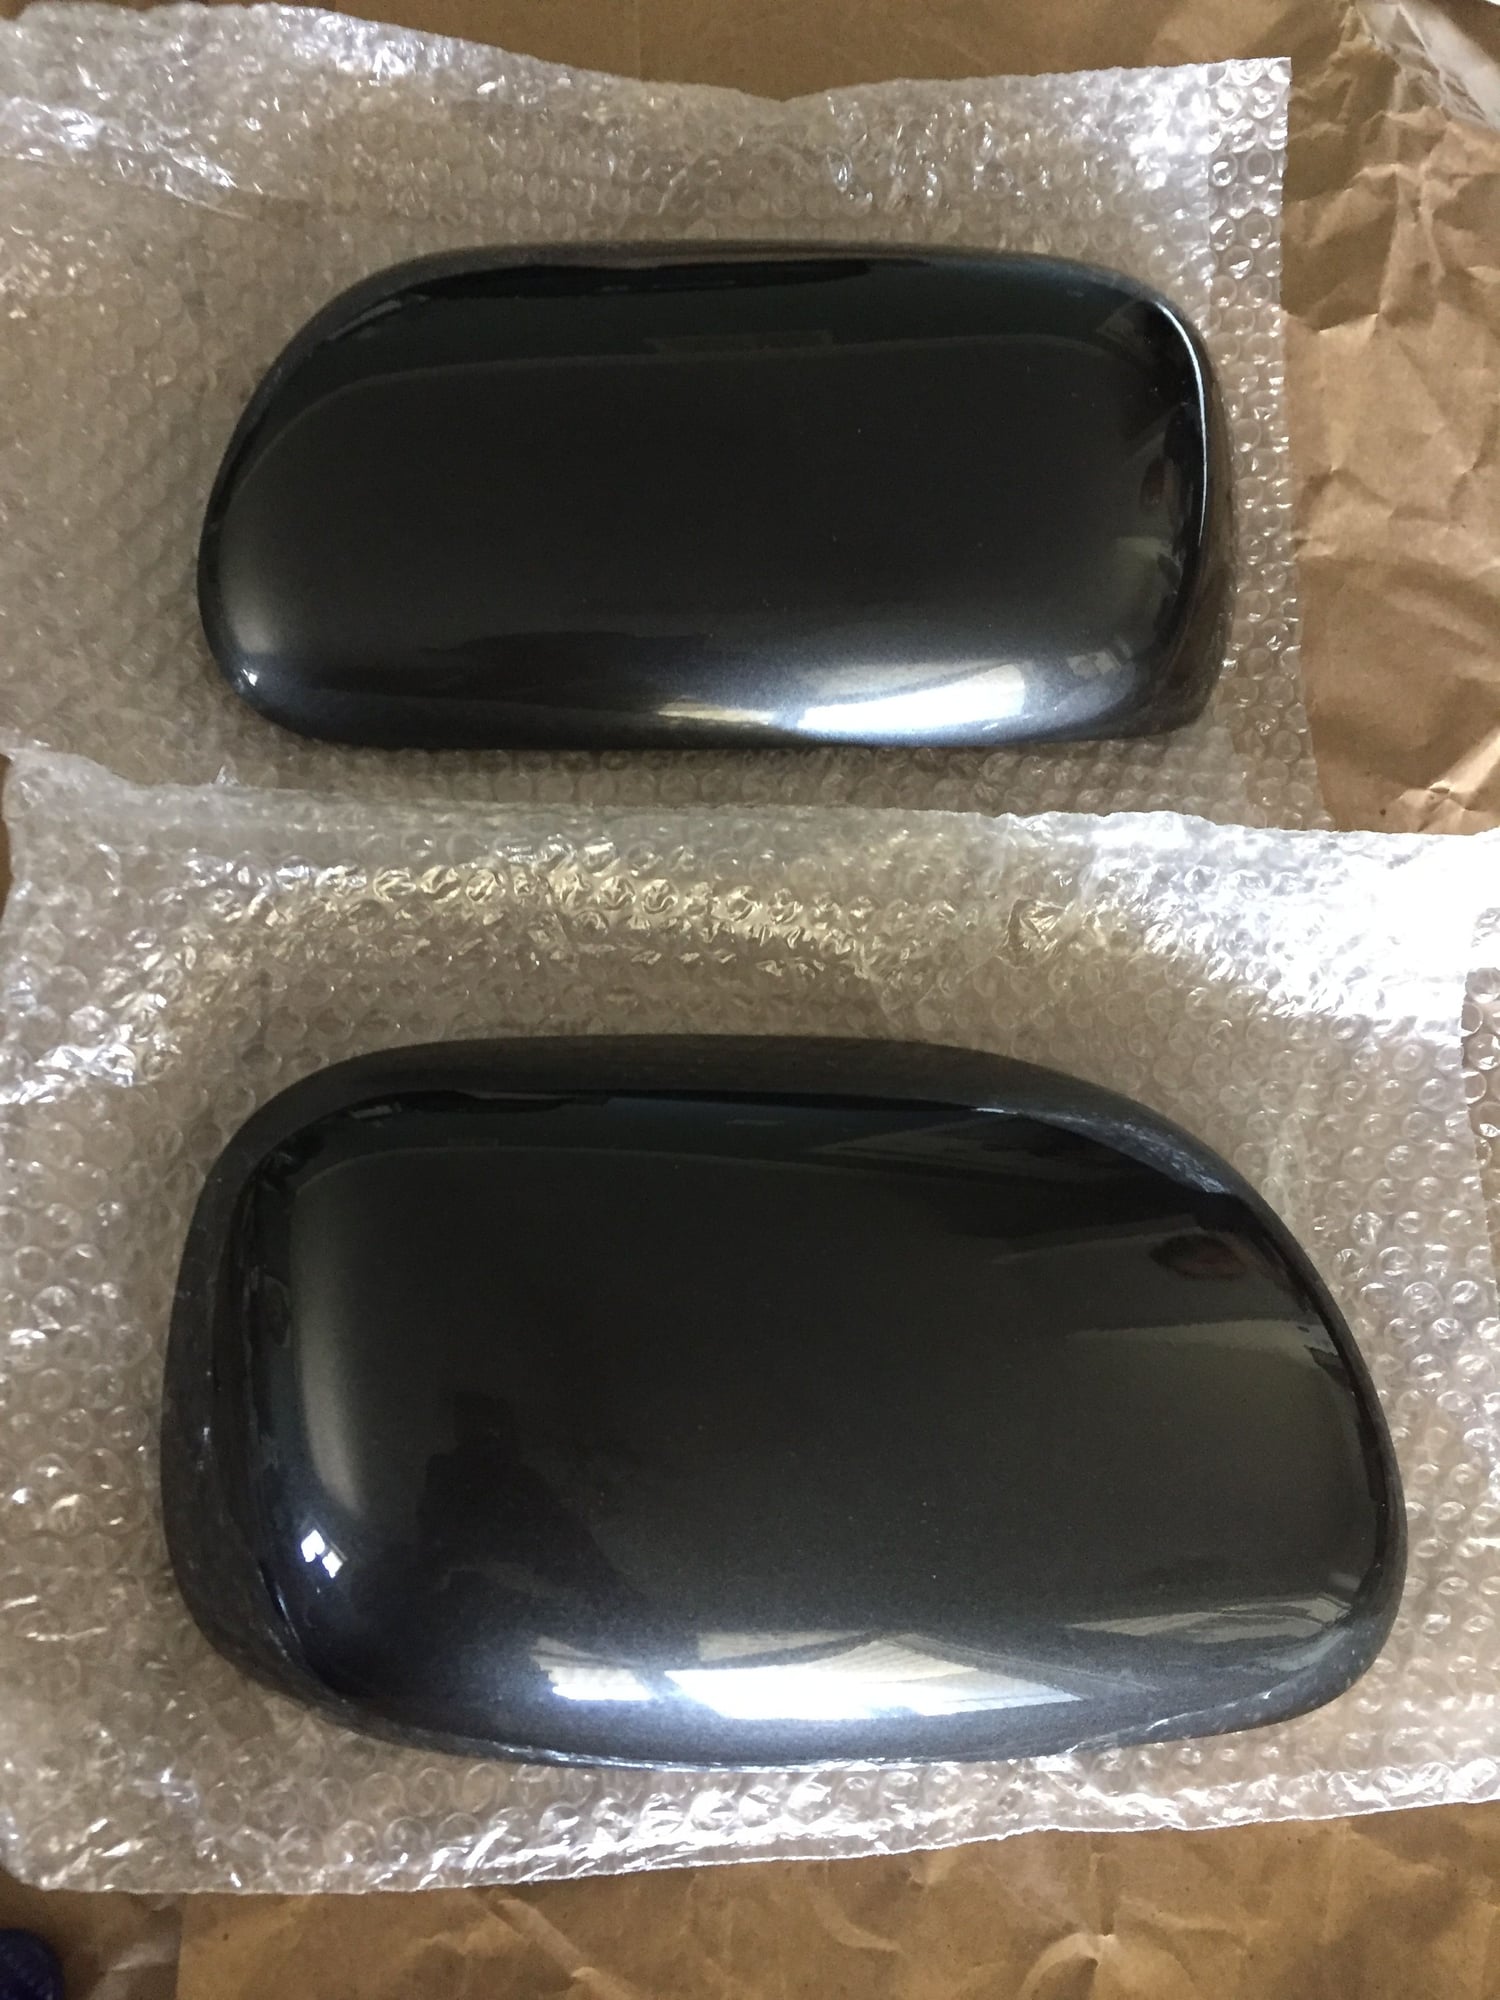 Exterior Body Parts - Original Lexus IS300 OEM Side Mirror Covers in GGP - Used - Los Angeles, CA 90071, United States